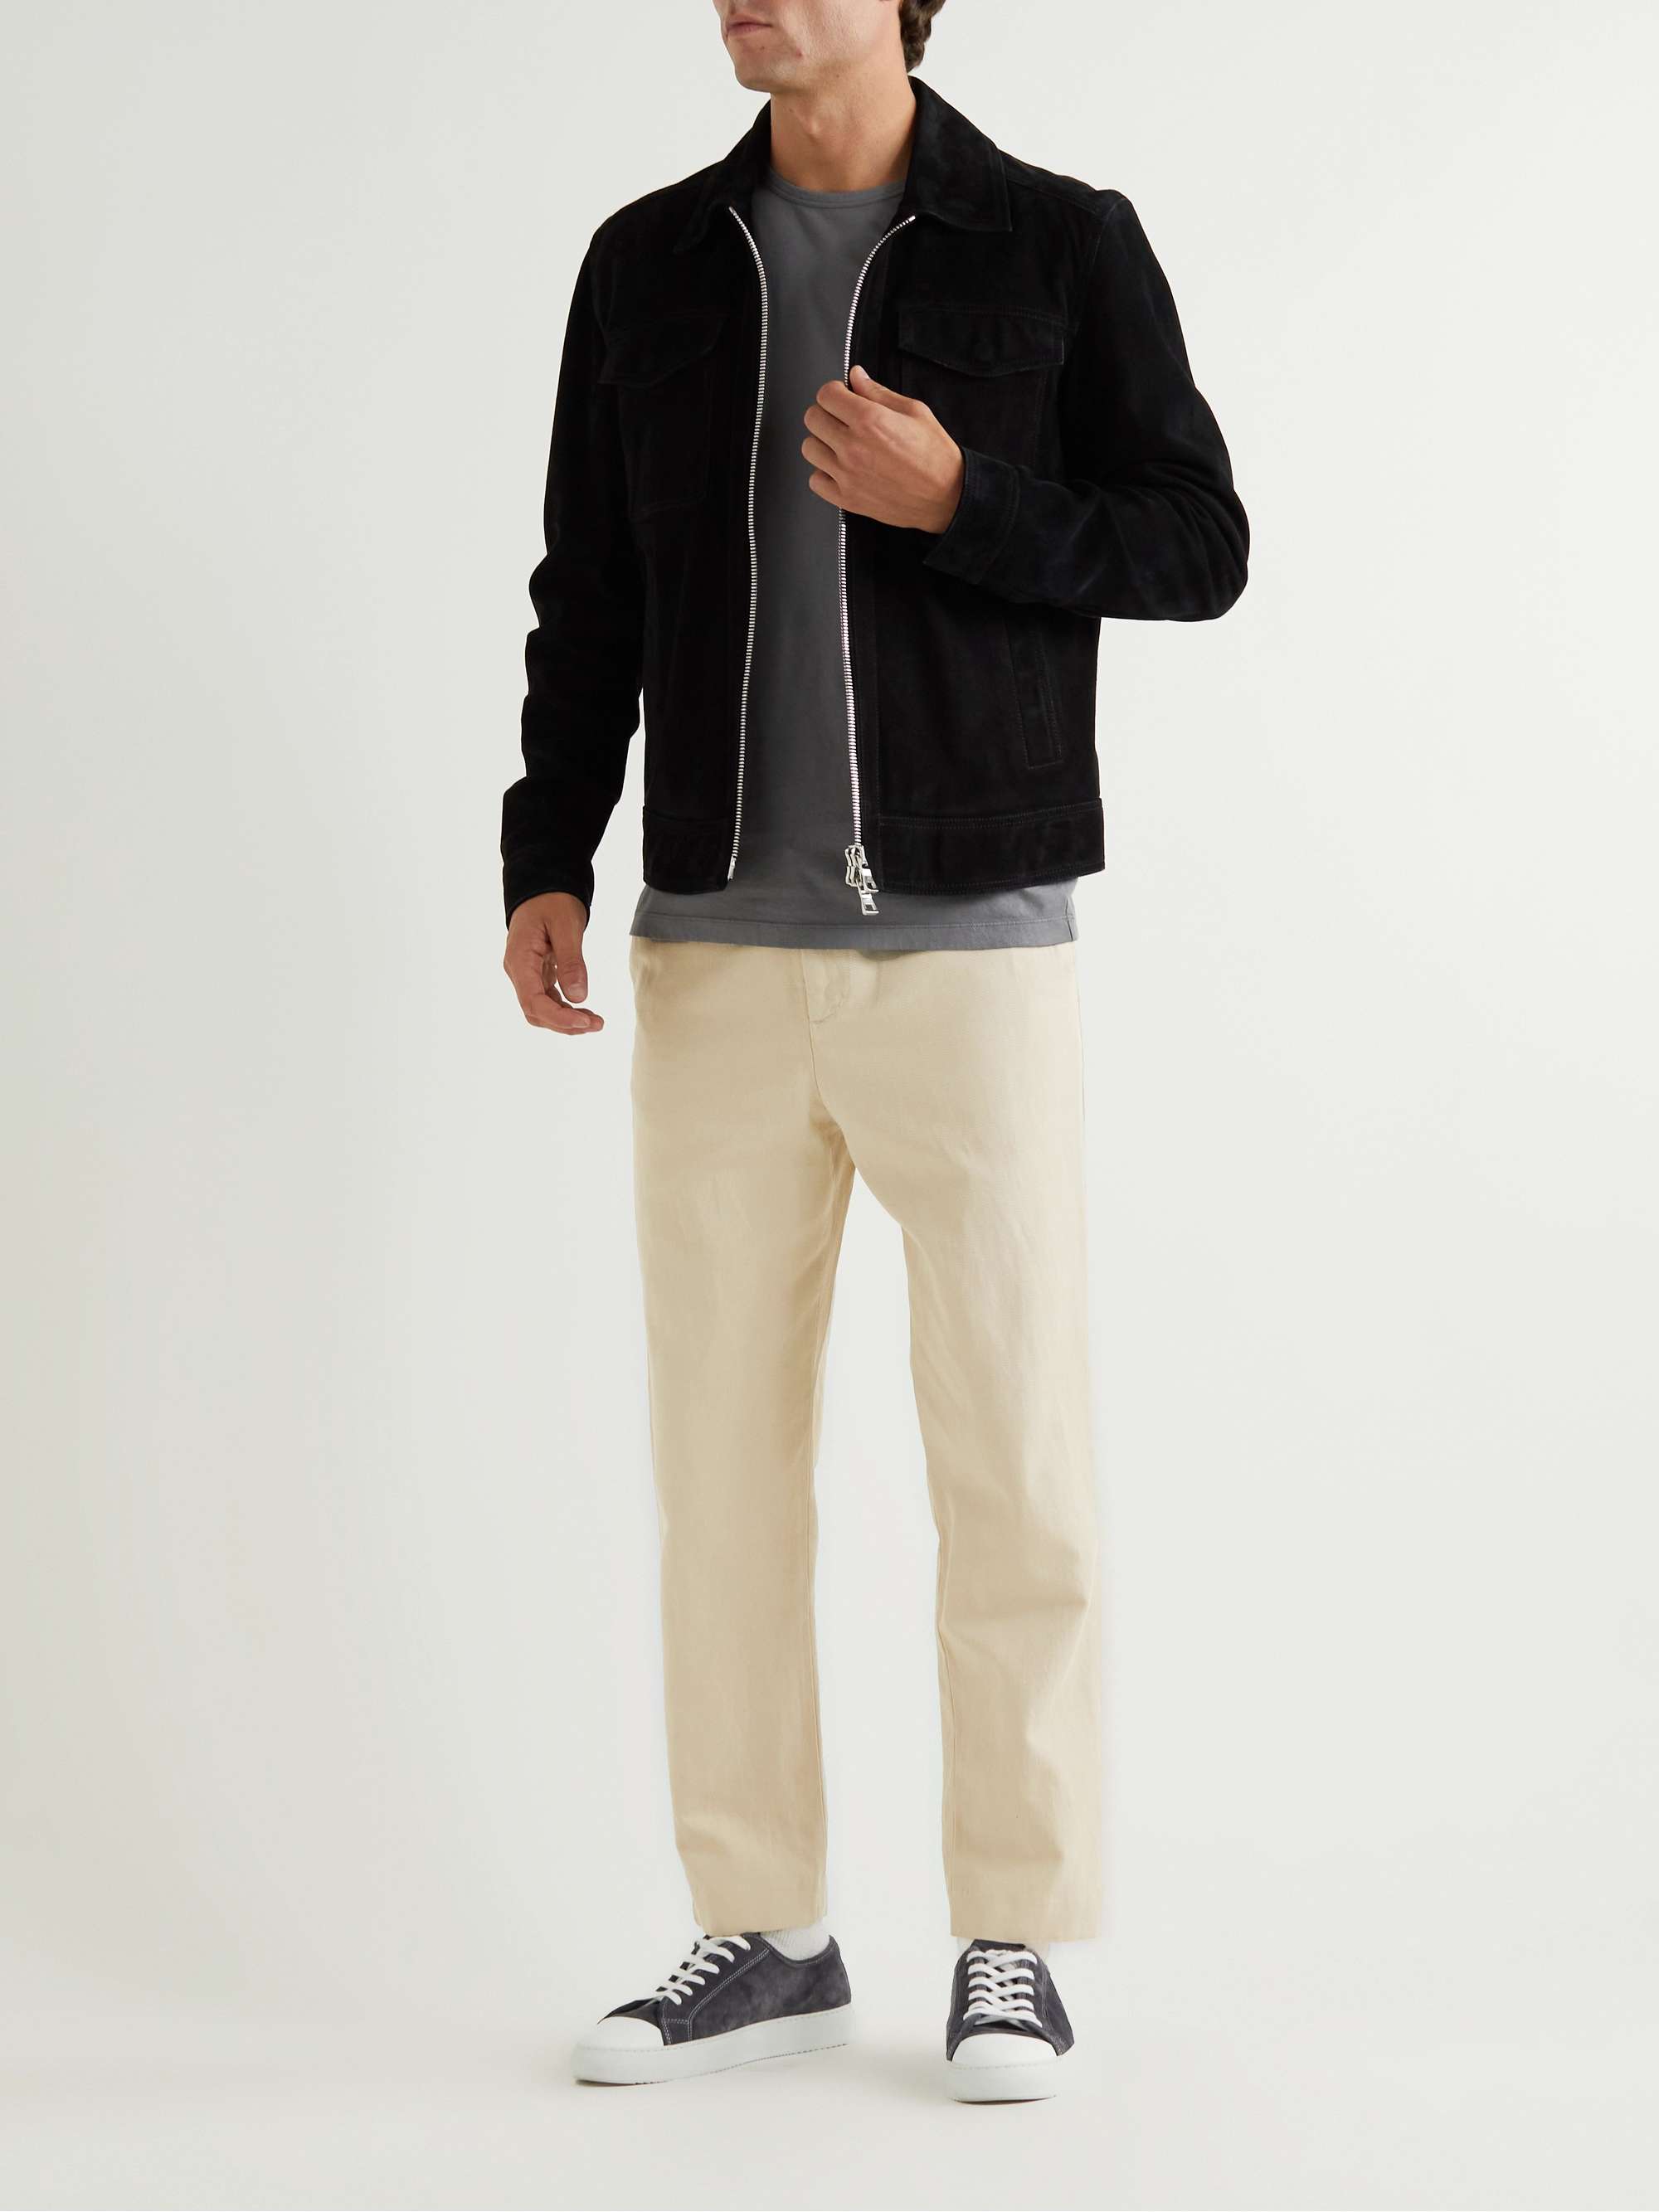 MR P. Cotton and Linen-Blend Twill Drawstring Trousers